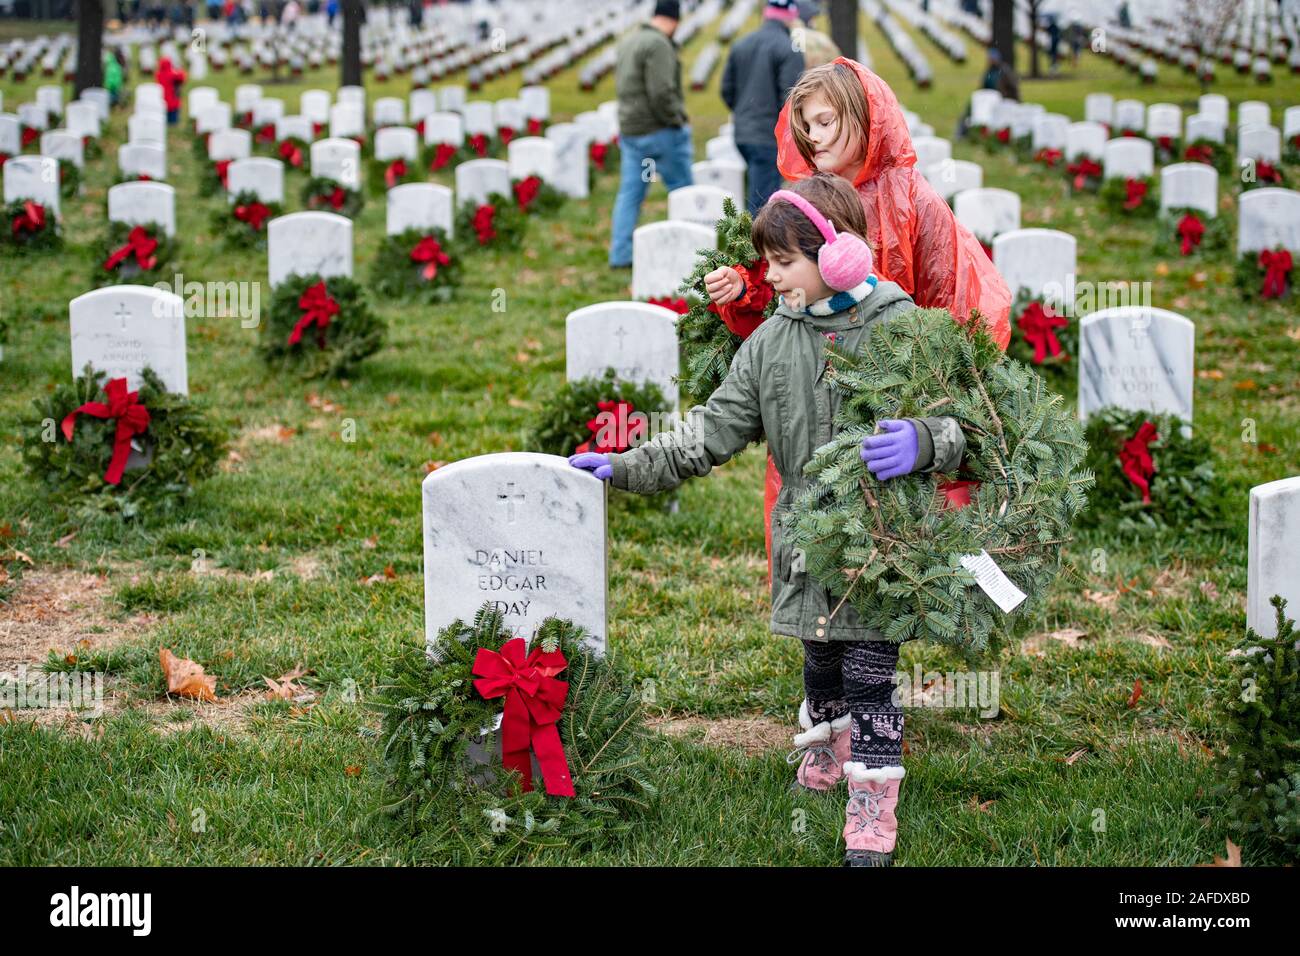 Arlington, United States of America. 14 December, 2019. A young girl touches a grave marker as she places a wreath on the gravesite of a fallen service member during the 28th Wreaths Across America Day at Arlington National Cemetery December 14, 2019 in Arlington, Virginia. More than 38,000 volunteers place wreaths at every gravesite at Arlington National Cemetery and other sites around the nation.  Credit: Elizabeth Fraser/DOD/Alamy Live News Stock Photo